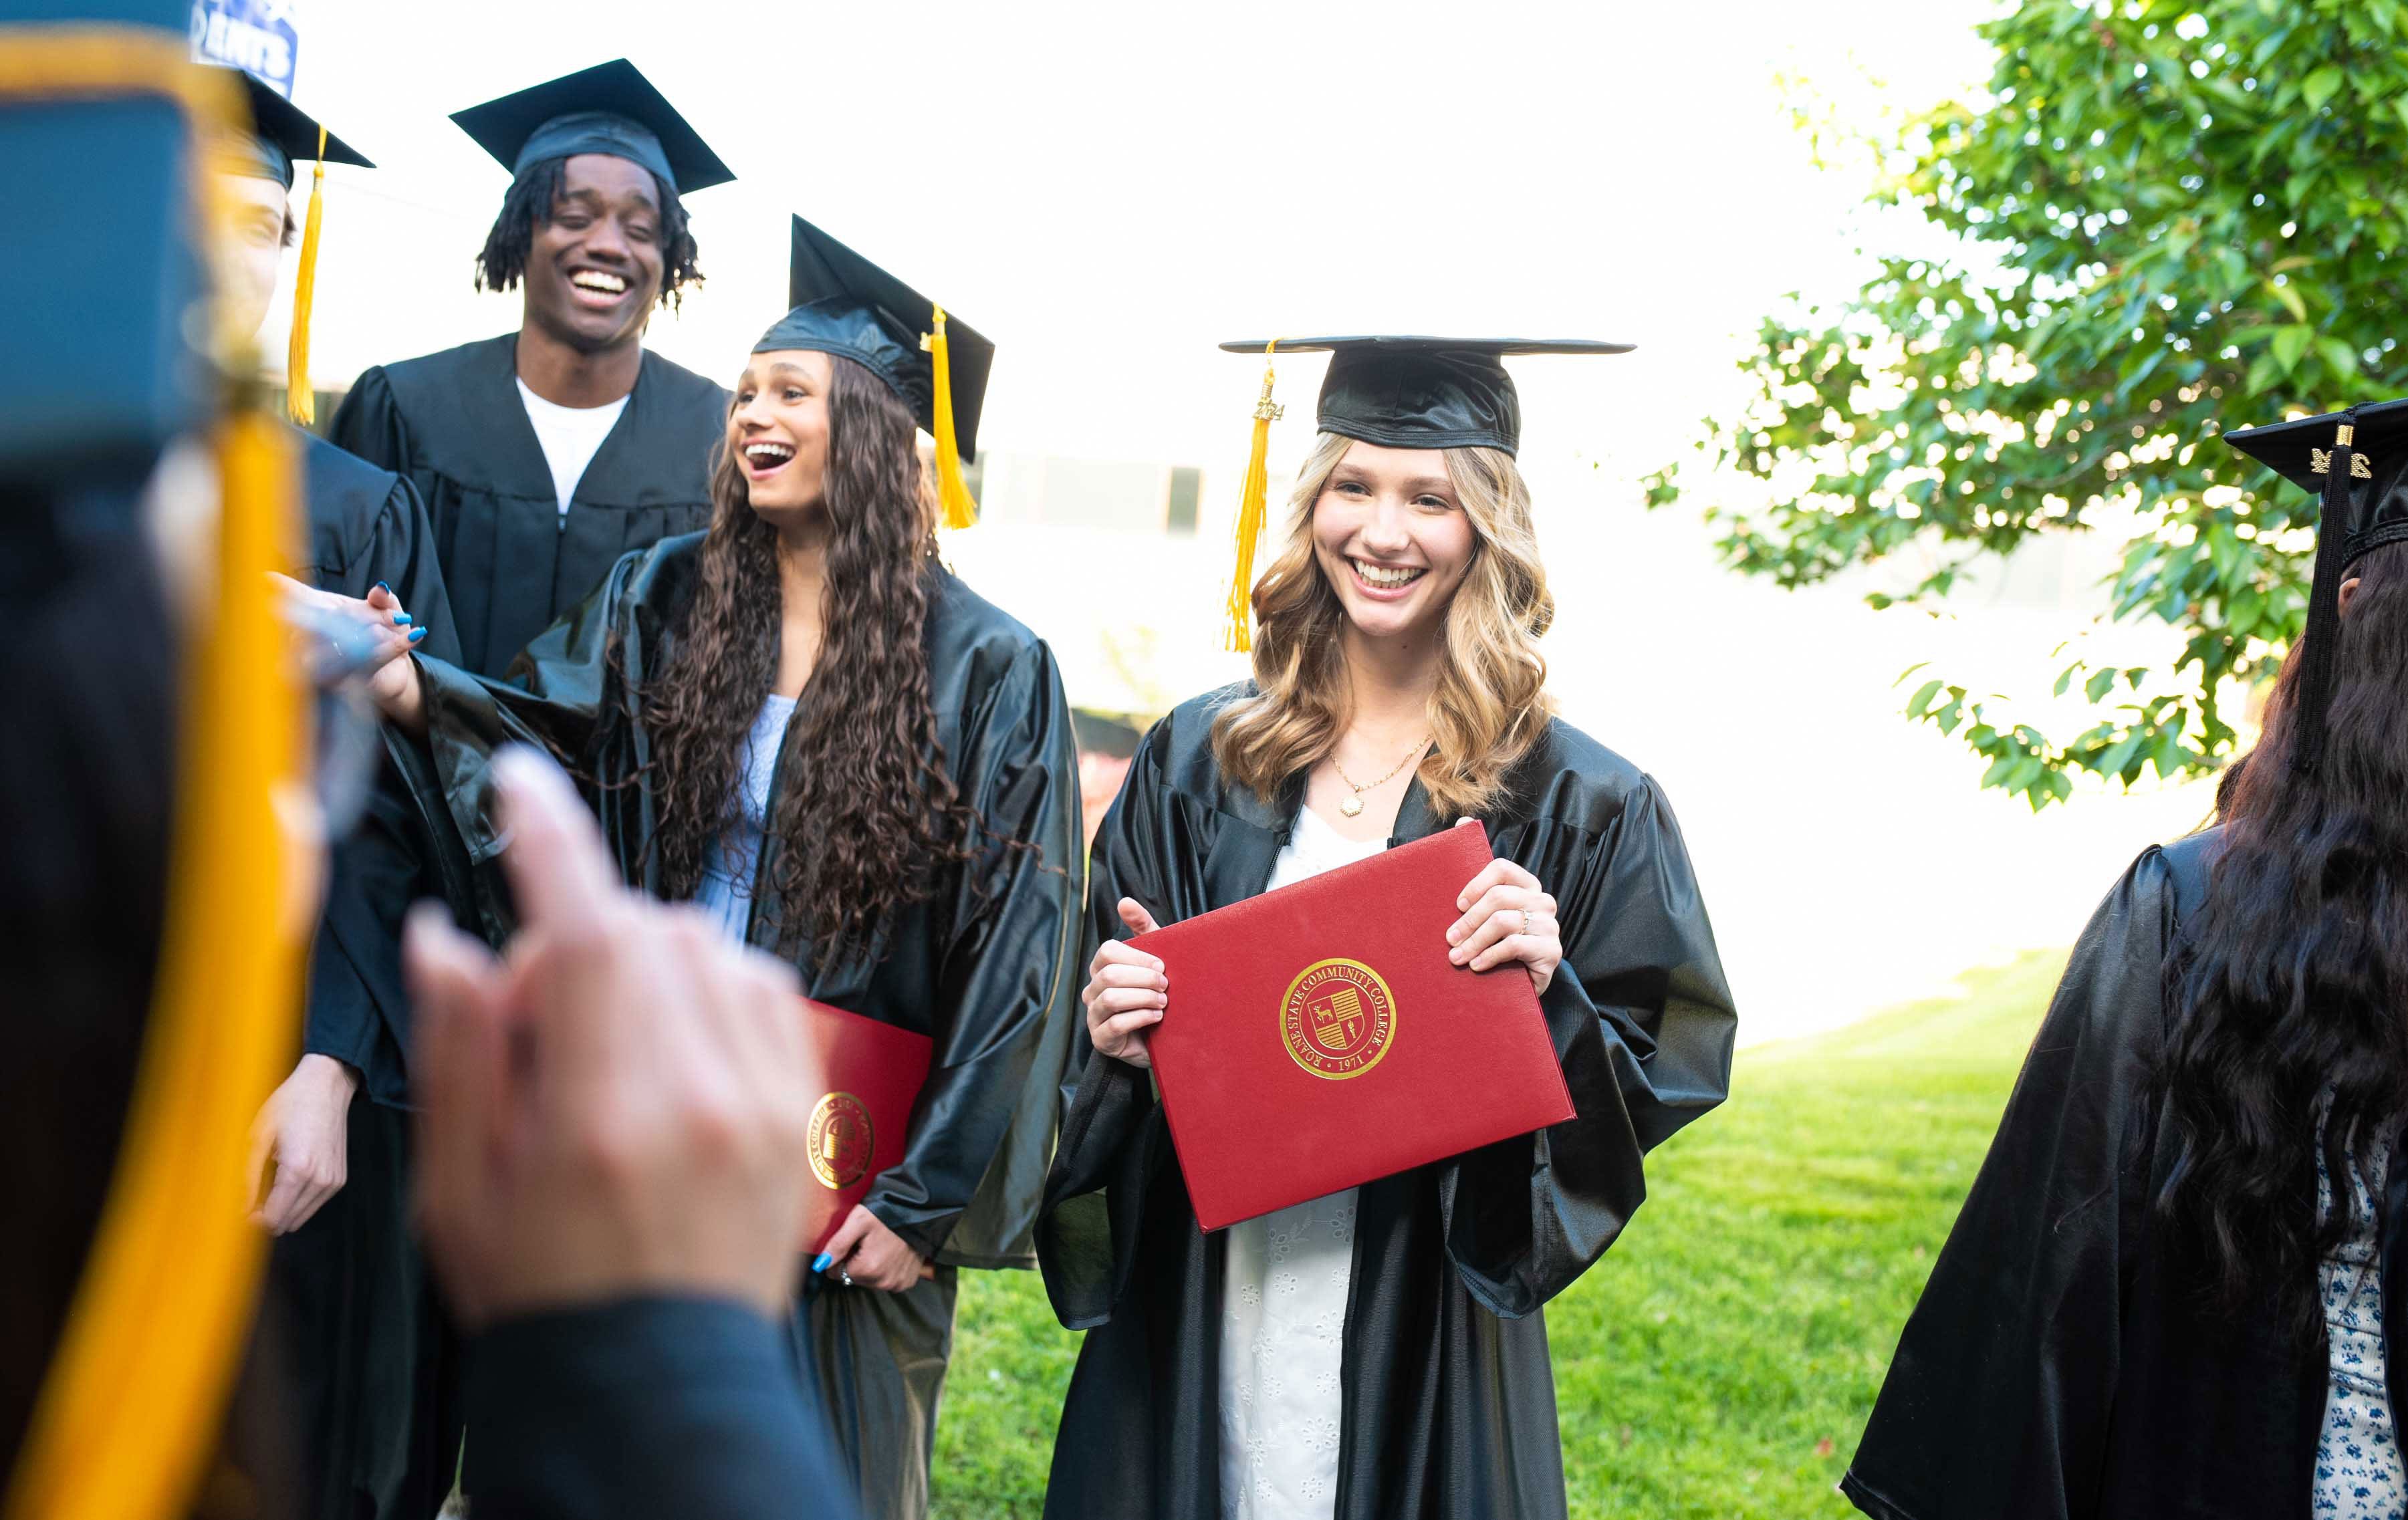 450 to graduate: Multiple grad ceremonies May 3-4 at Roane State Community College